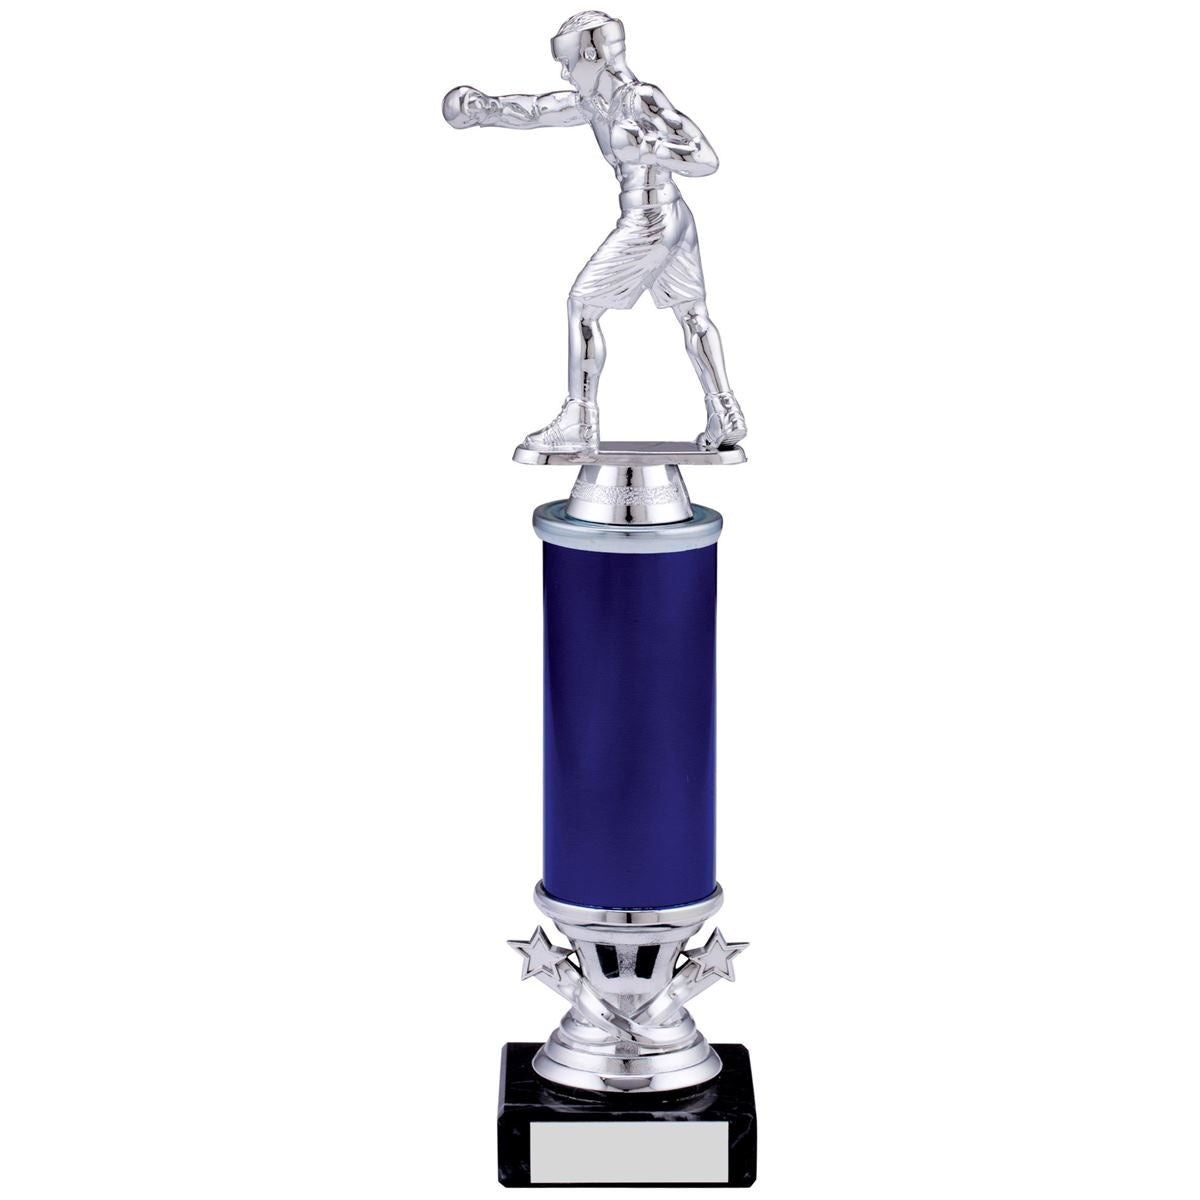 Boxing Mini Tower Trophy Silver and Blue Tube Award - C Size